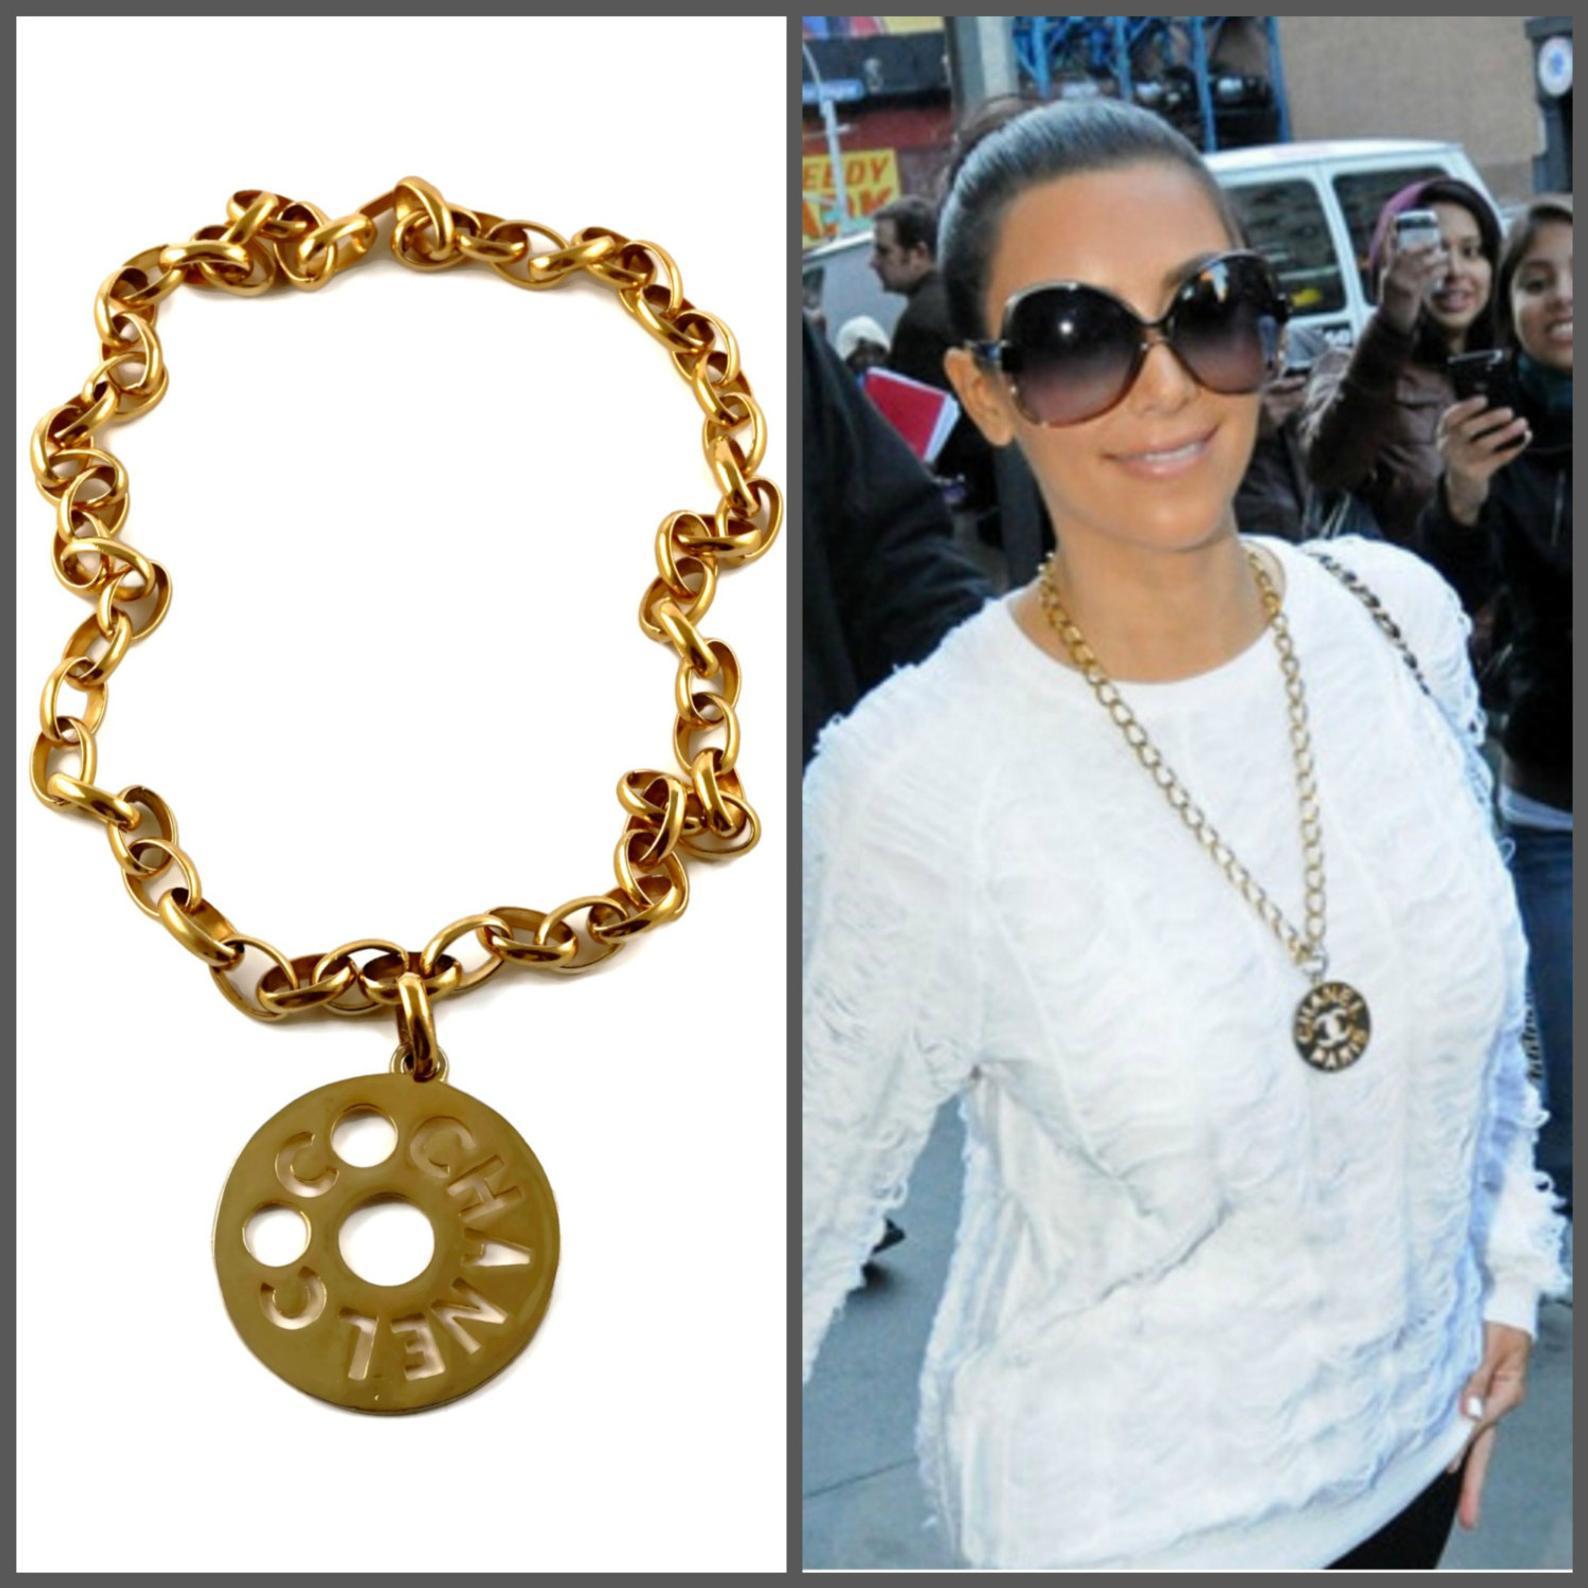 Vintage COCO CHANEL Cutout Openwork Logo Medallion Kim Kardashian Necklace

Measurements:
Height: 2 3/8 inches (6.03 cm) excluding the bail
Width: 2 3/8 inches (6.03 cm)
Chain: 31 4/8 cm (80.01 cm)

As seen on Kim Kardashian wearing similar necklace